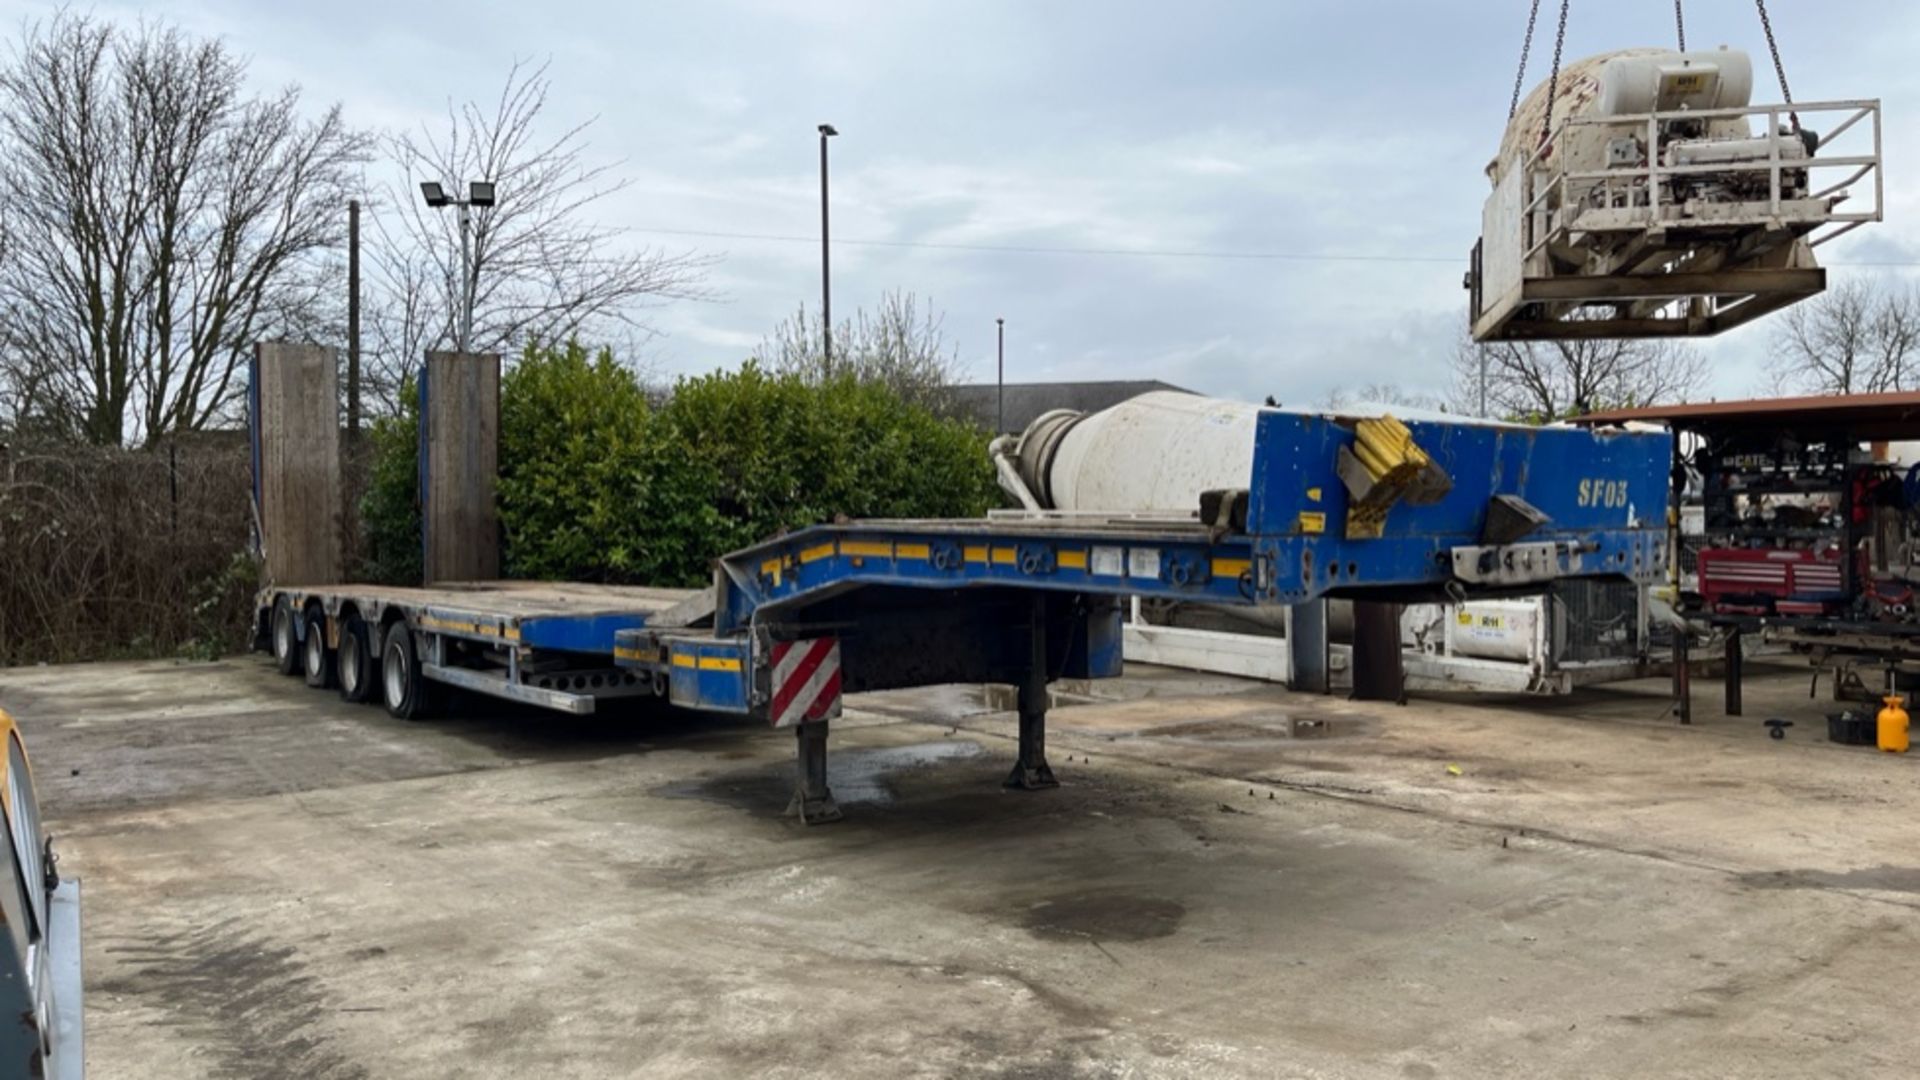 FAYMONVILLE MULTIMAX - EXTENDABLE SEMI LOW LOADER Trailer (Year 2017) - Image 2 of 28